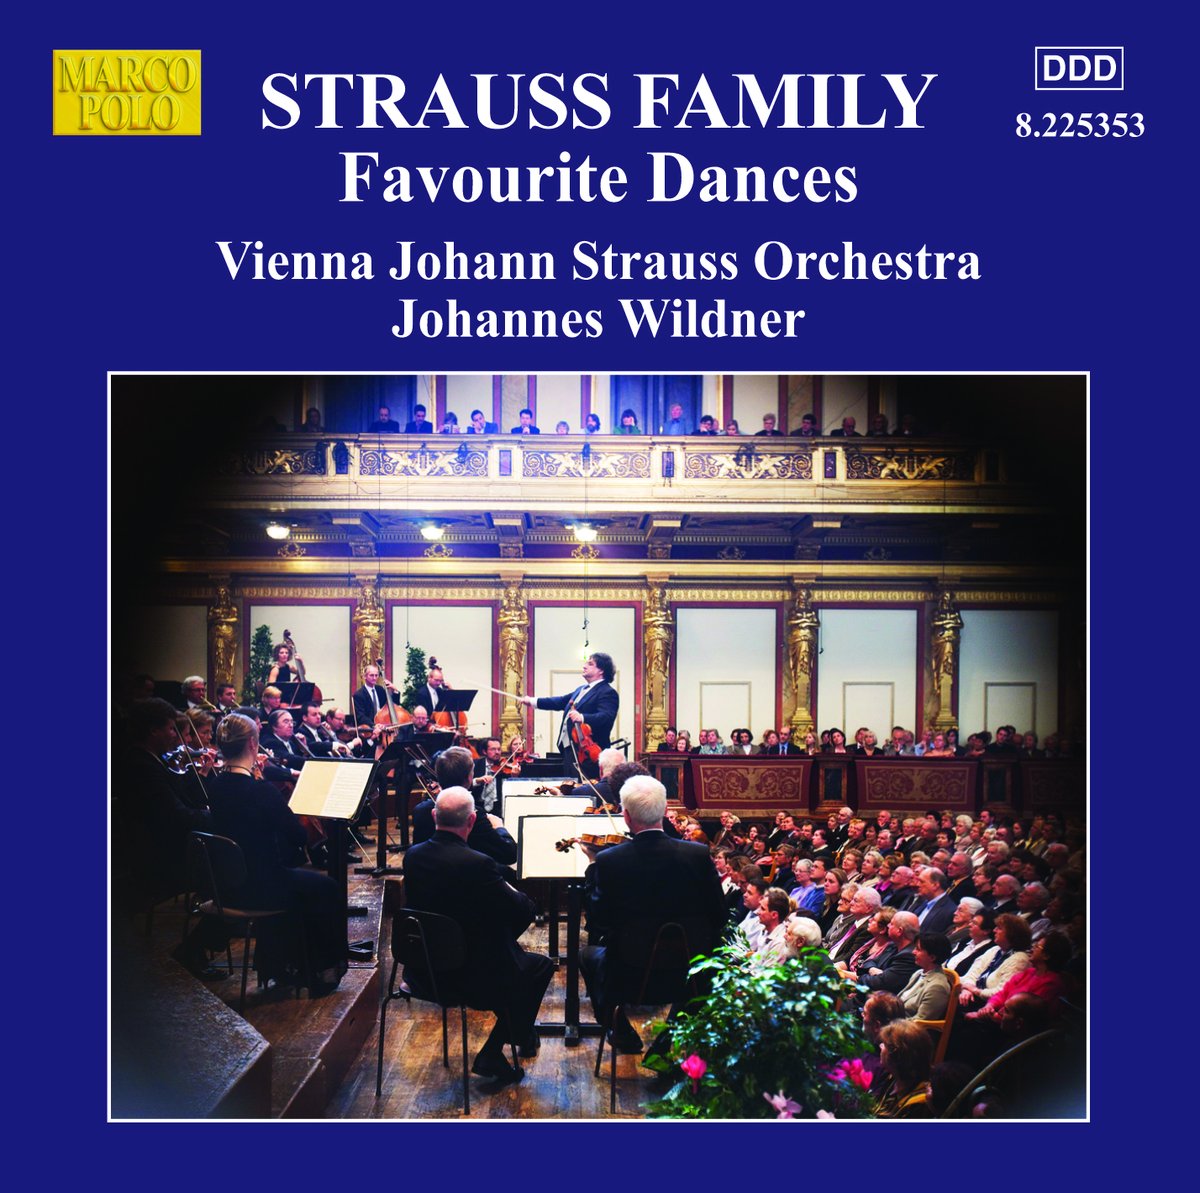 🎶 Strauss recording of the day 🎶
09. J. Strauss II: The Blue Danube (CD Favourite Dances)
▶️ Spotify: open.spotify.com/track/1p5Js0Pw…
▶️ Apple Music: music.apple.com/at/album/der-s…
▶️ Deezer: deezer.com/track/61176573…
📀 Info: wjso.or.at/en-us/Home/Sho…

#WJSO #Music